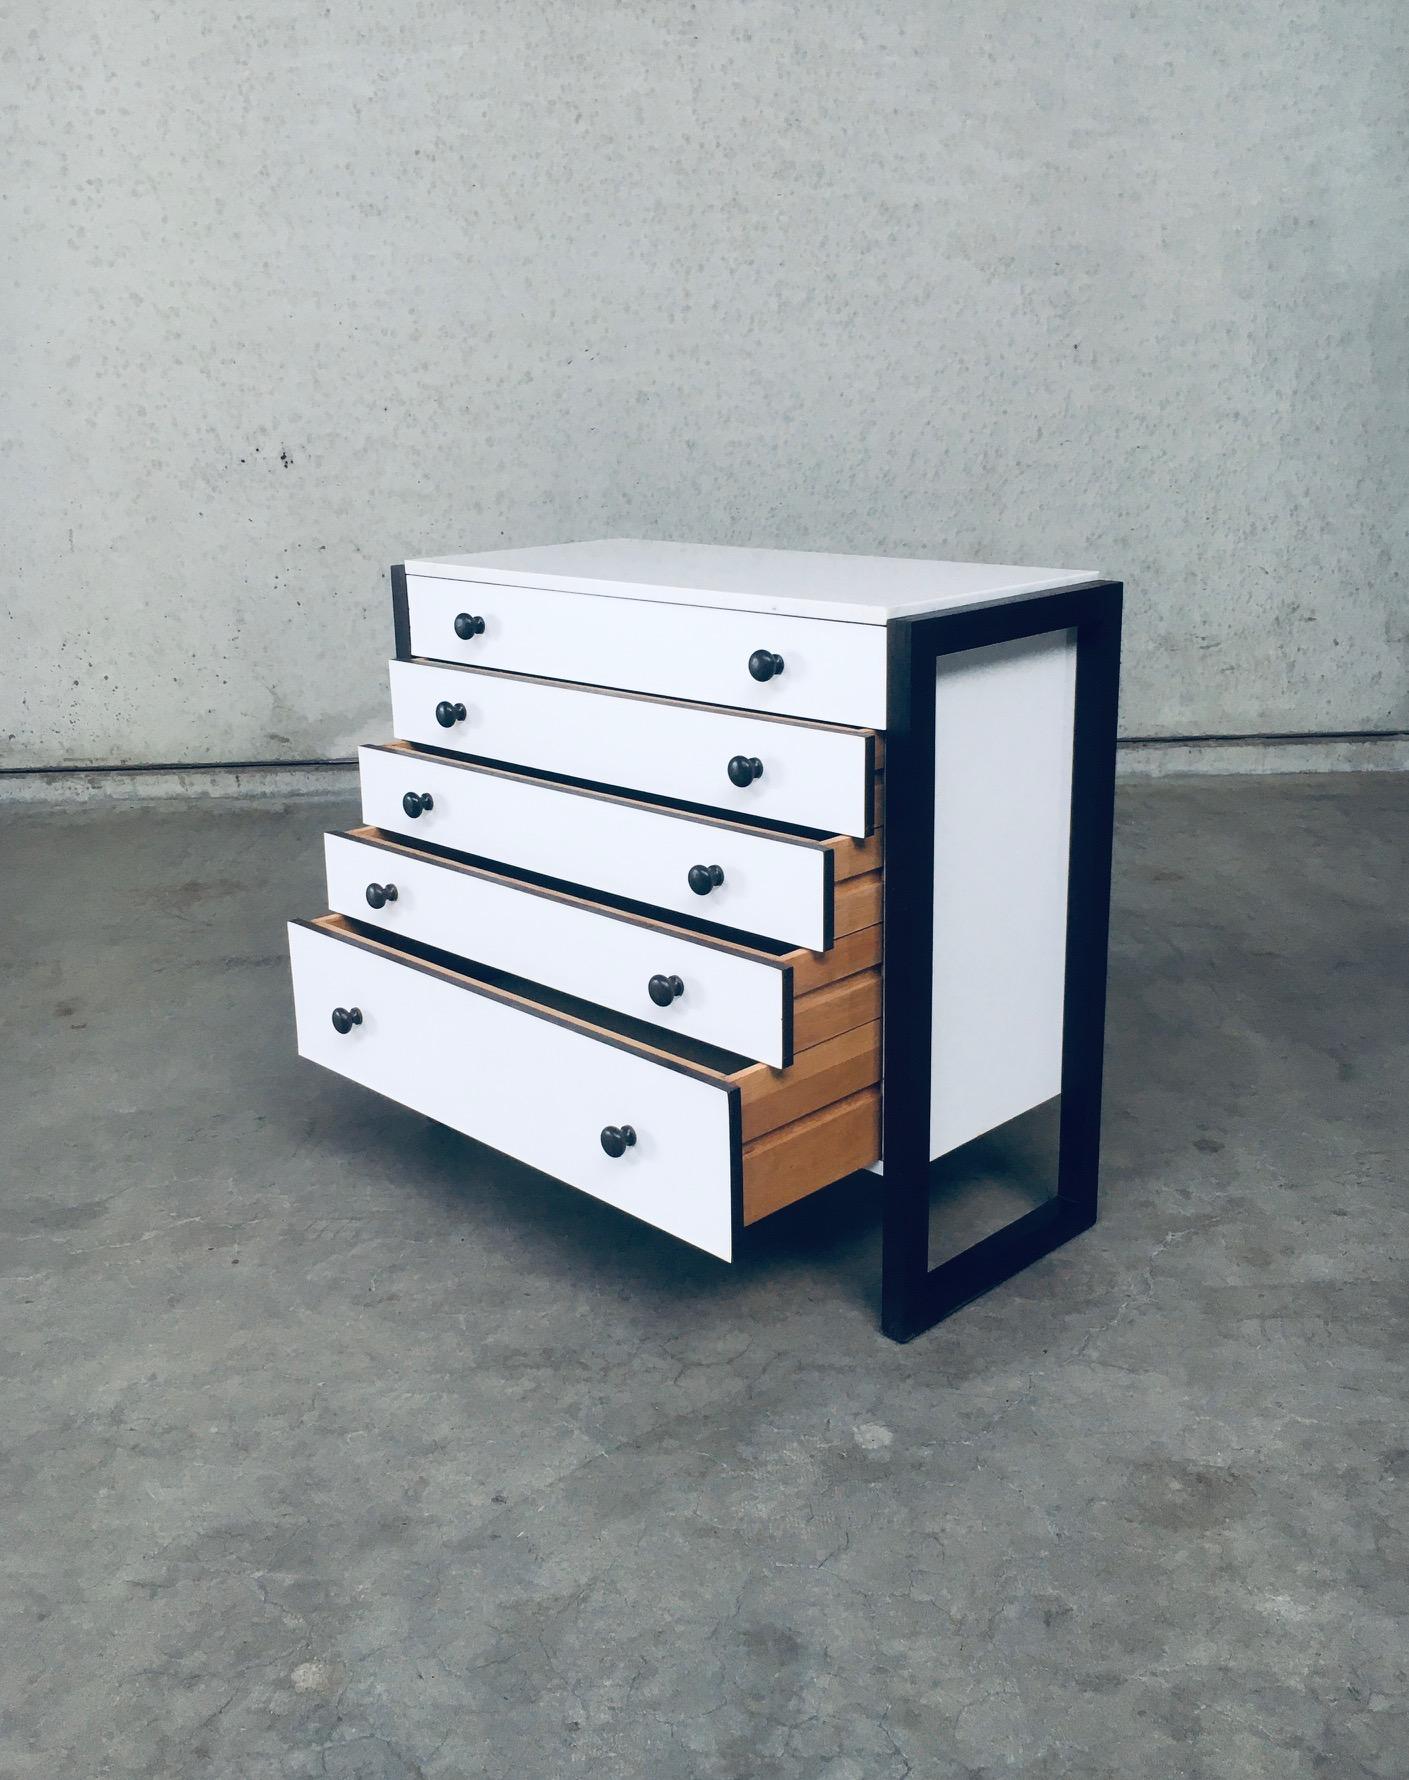 Midcentury Modern Design Chest of Drawers, Belgium 1960's For Sale 1